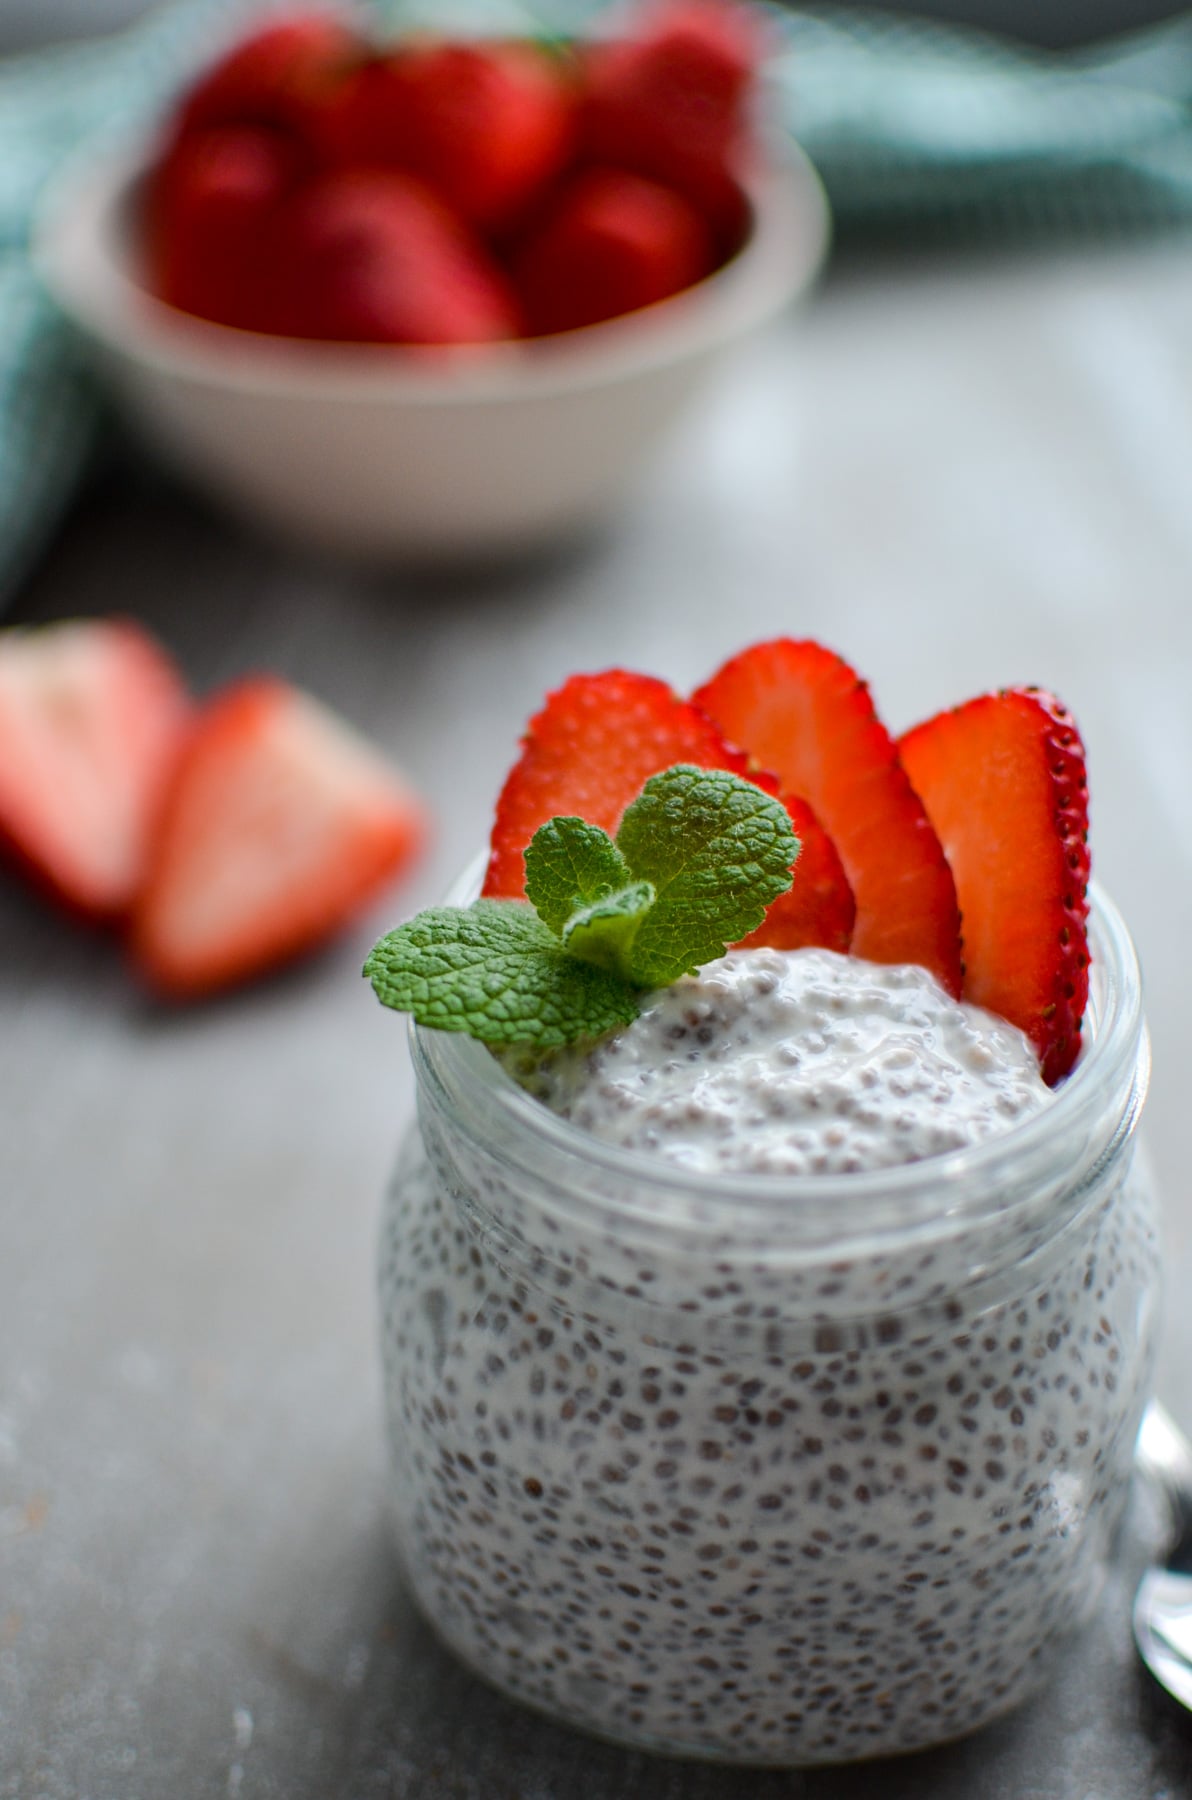 A jar of chia pudding, garnished with strawberry slices